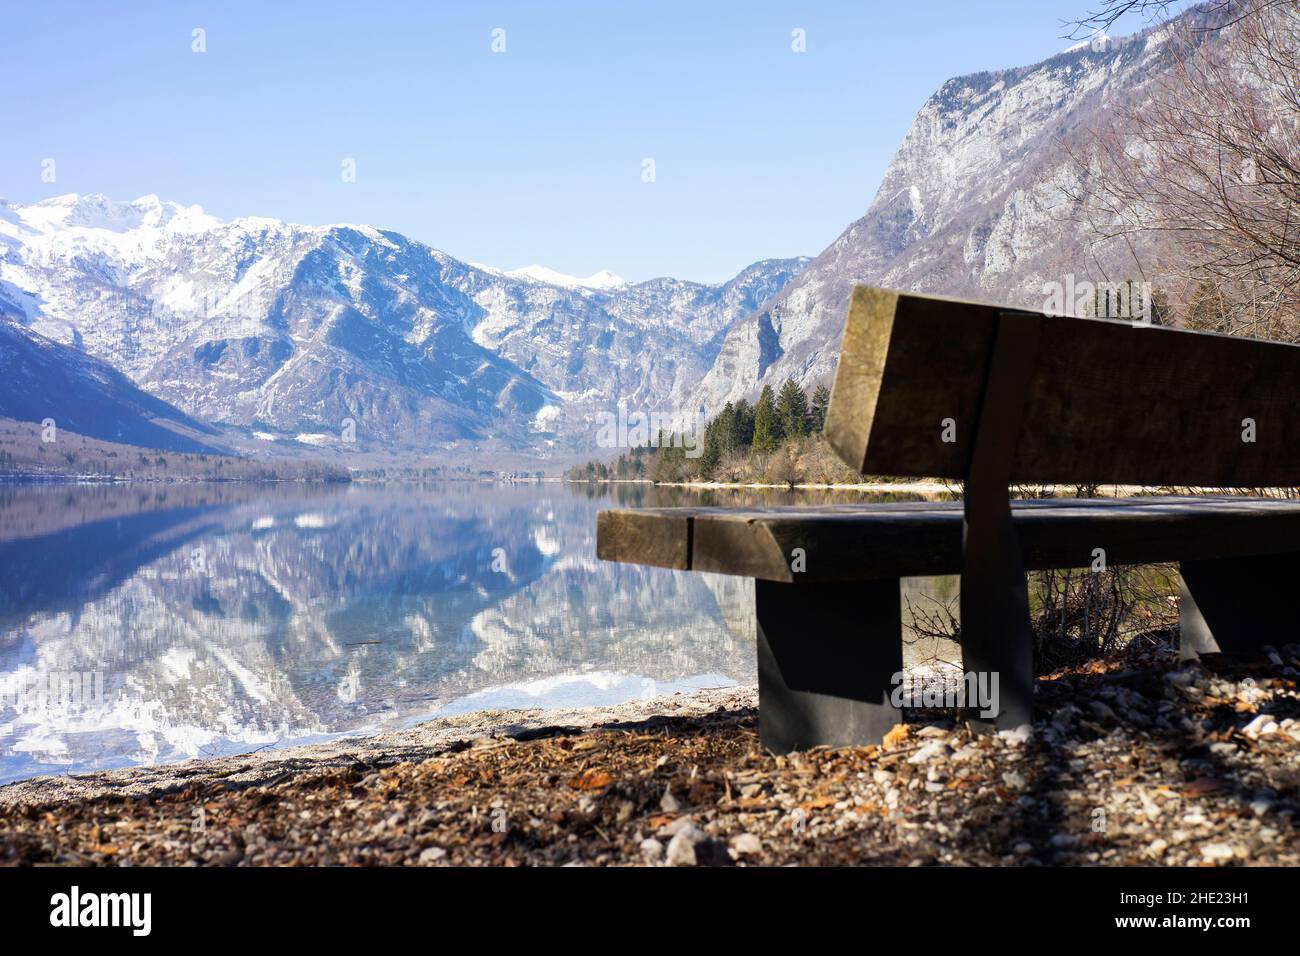 Spot for relaxation around the lake Bohinj, located in Slovenian Alps. Stock Photo